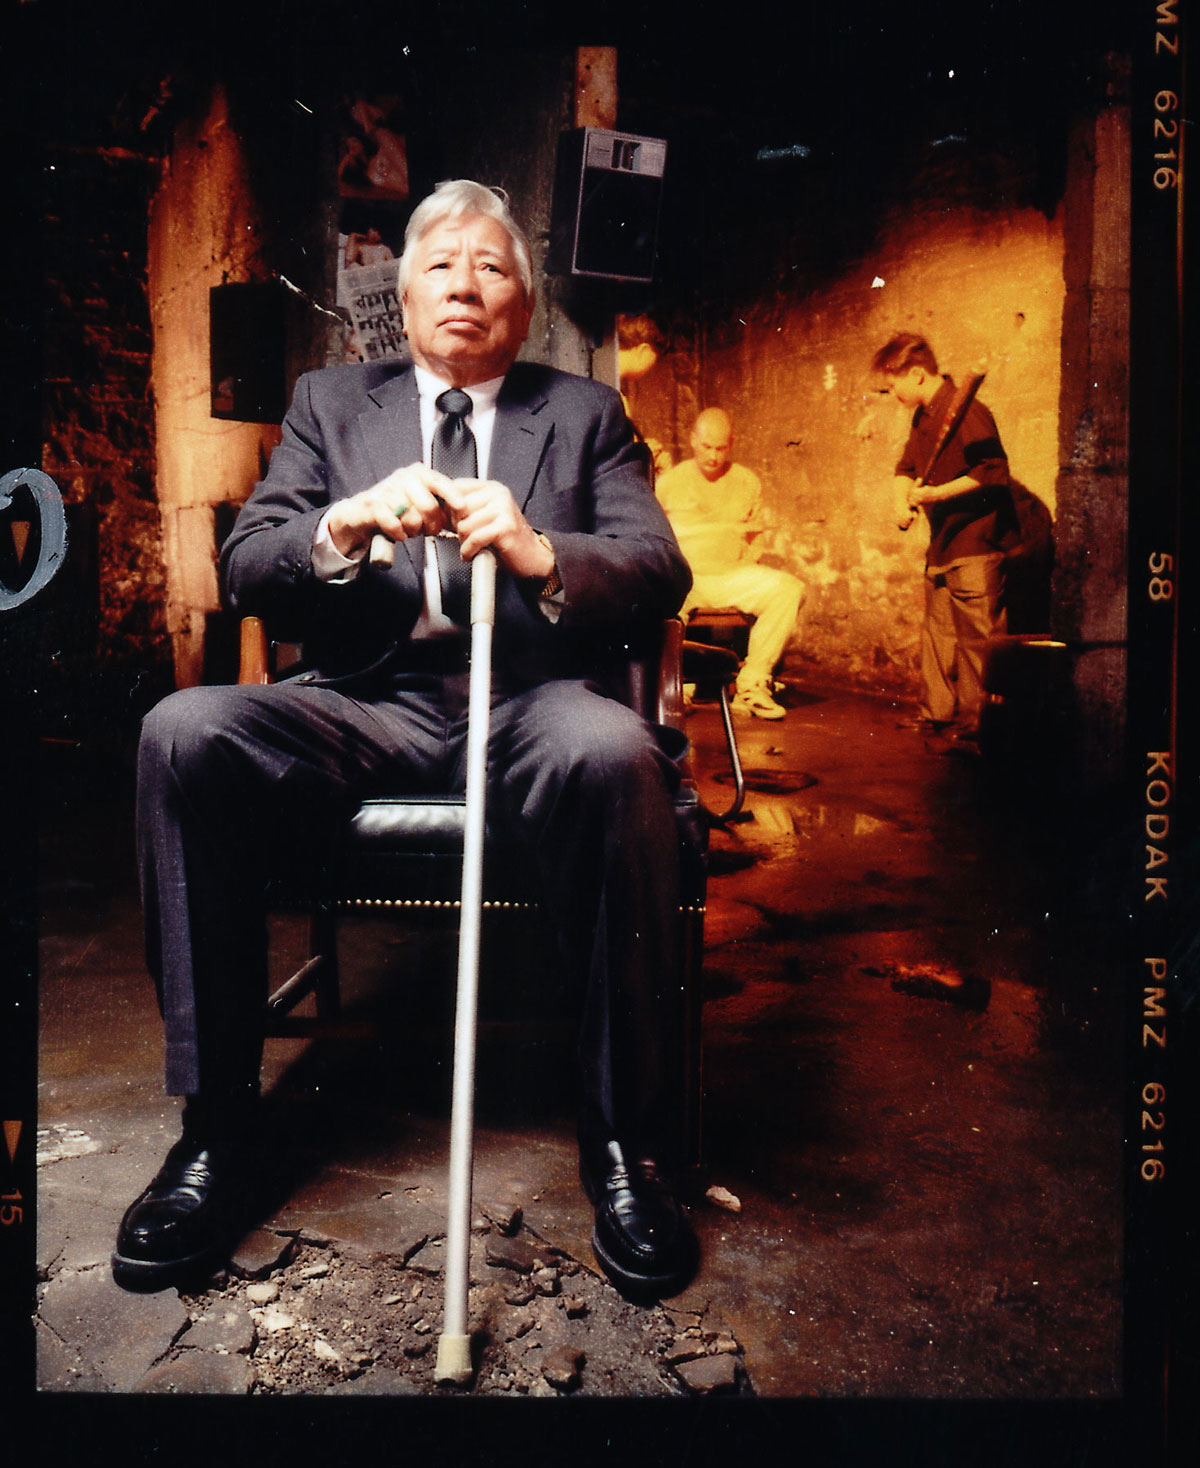 An older man in a suit sits with a cane in his hands, in the background the man is holding a bat in front of the man in the chair